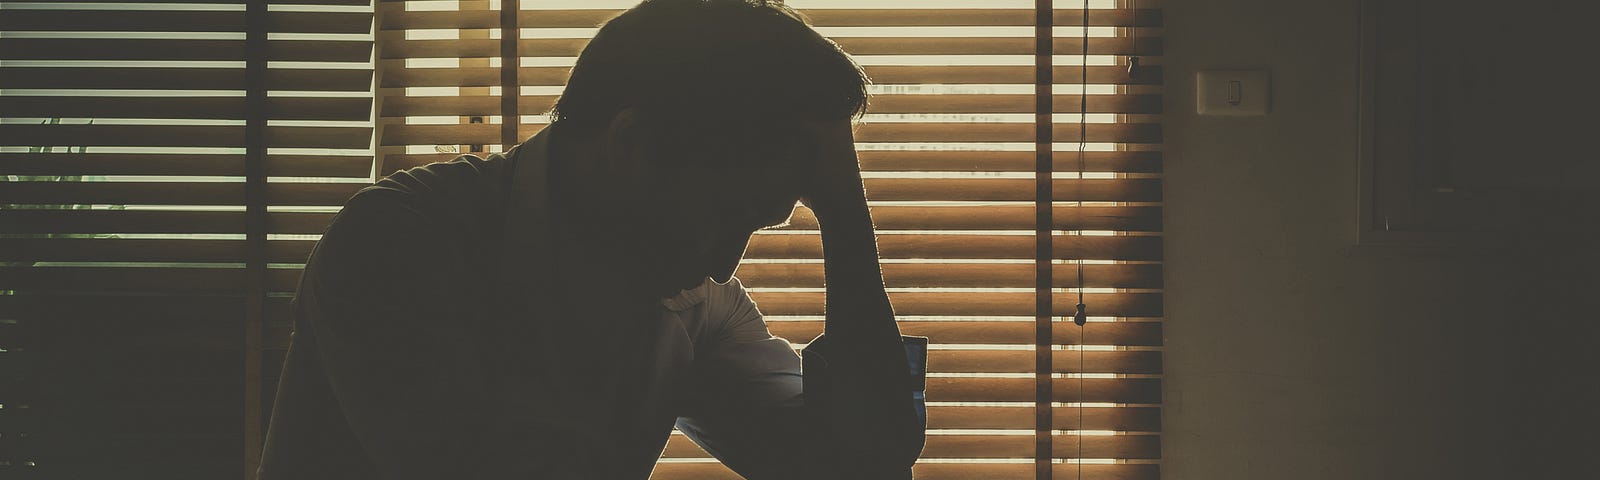 A silhouette of a man sitting on his bed with his hand against his forehead, seemingly upset, light seeping from the blinds.